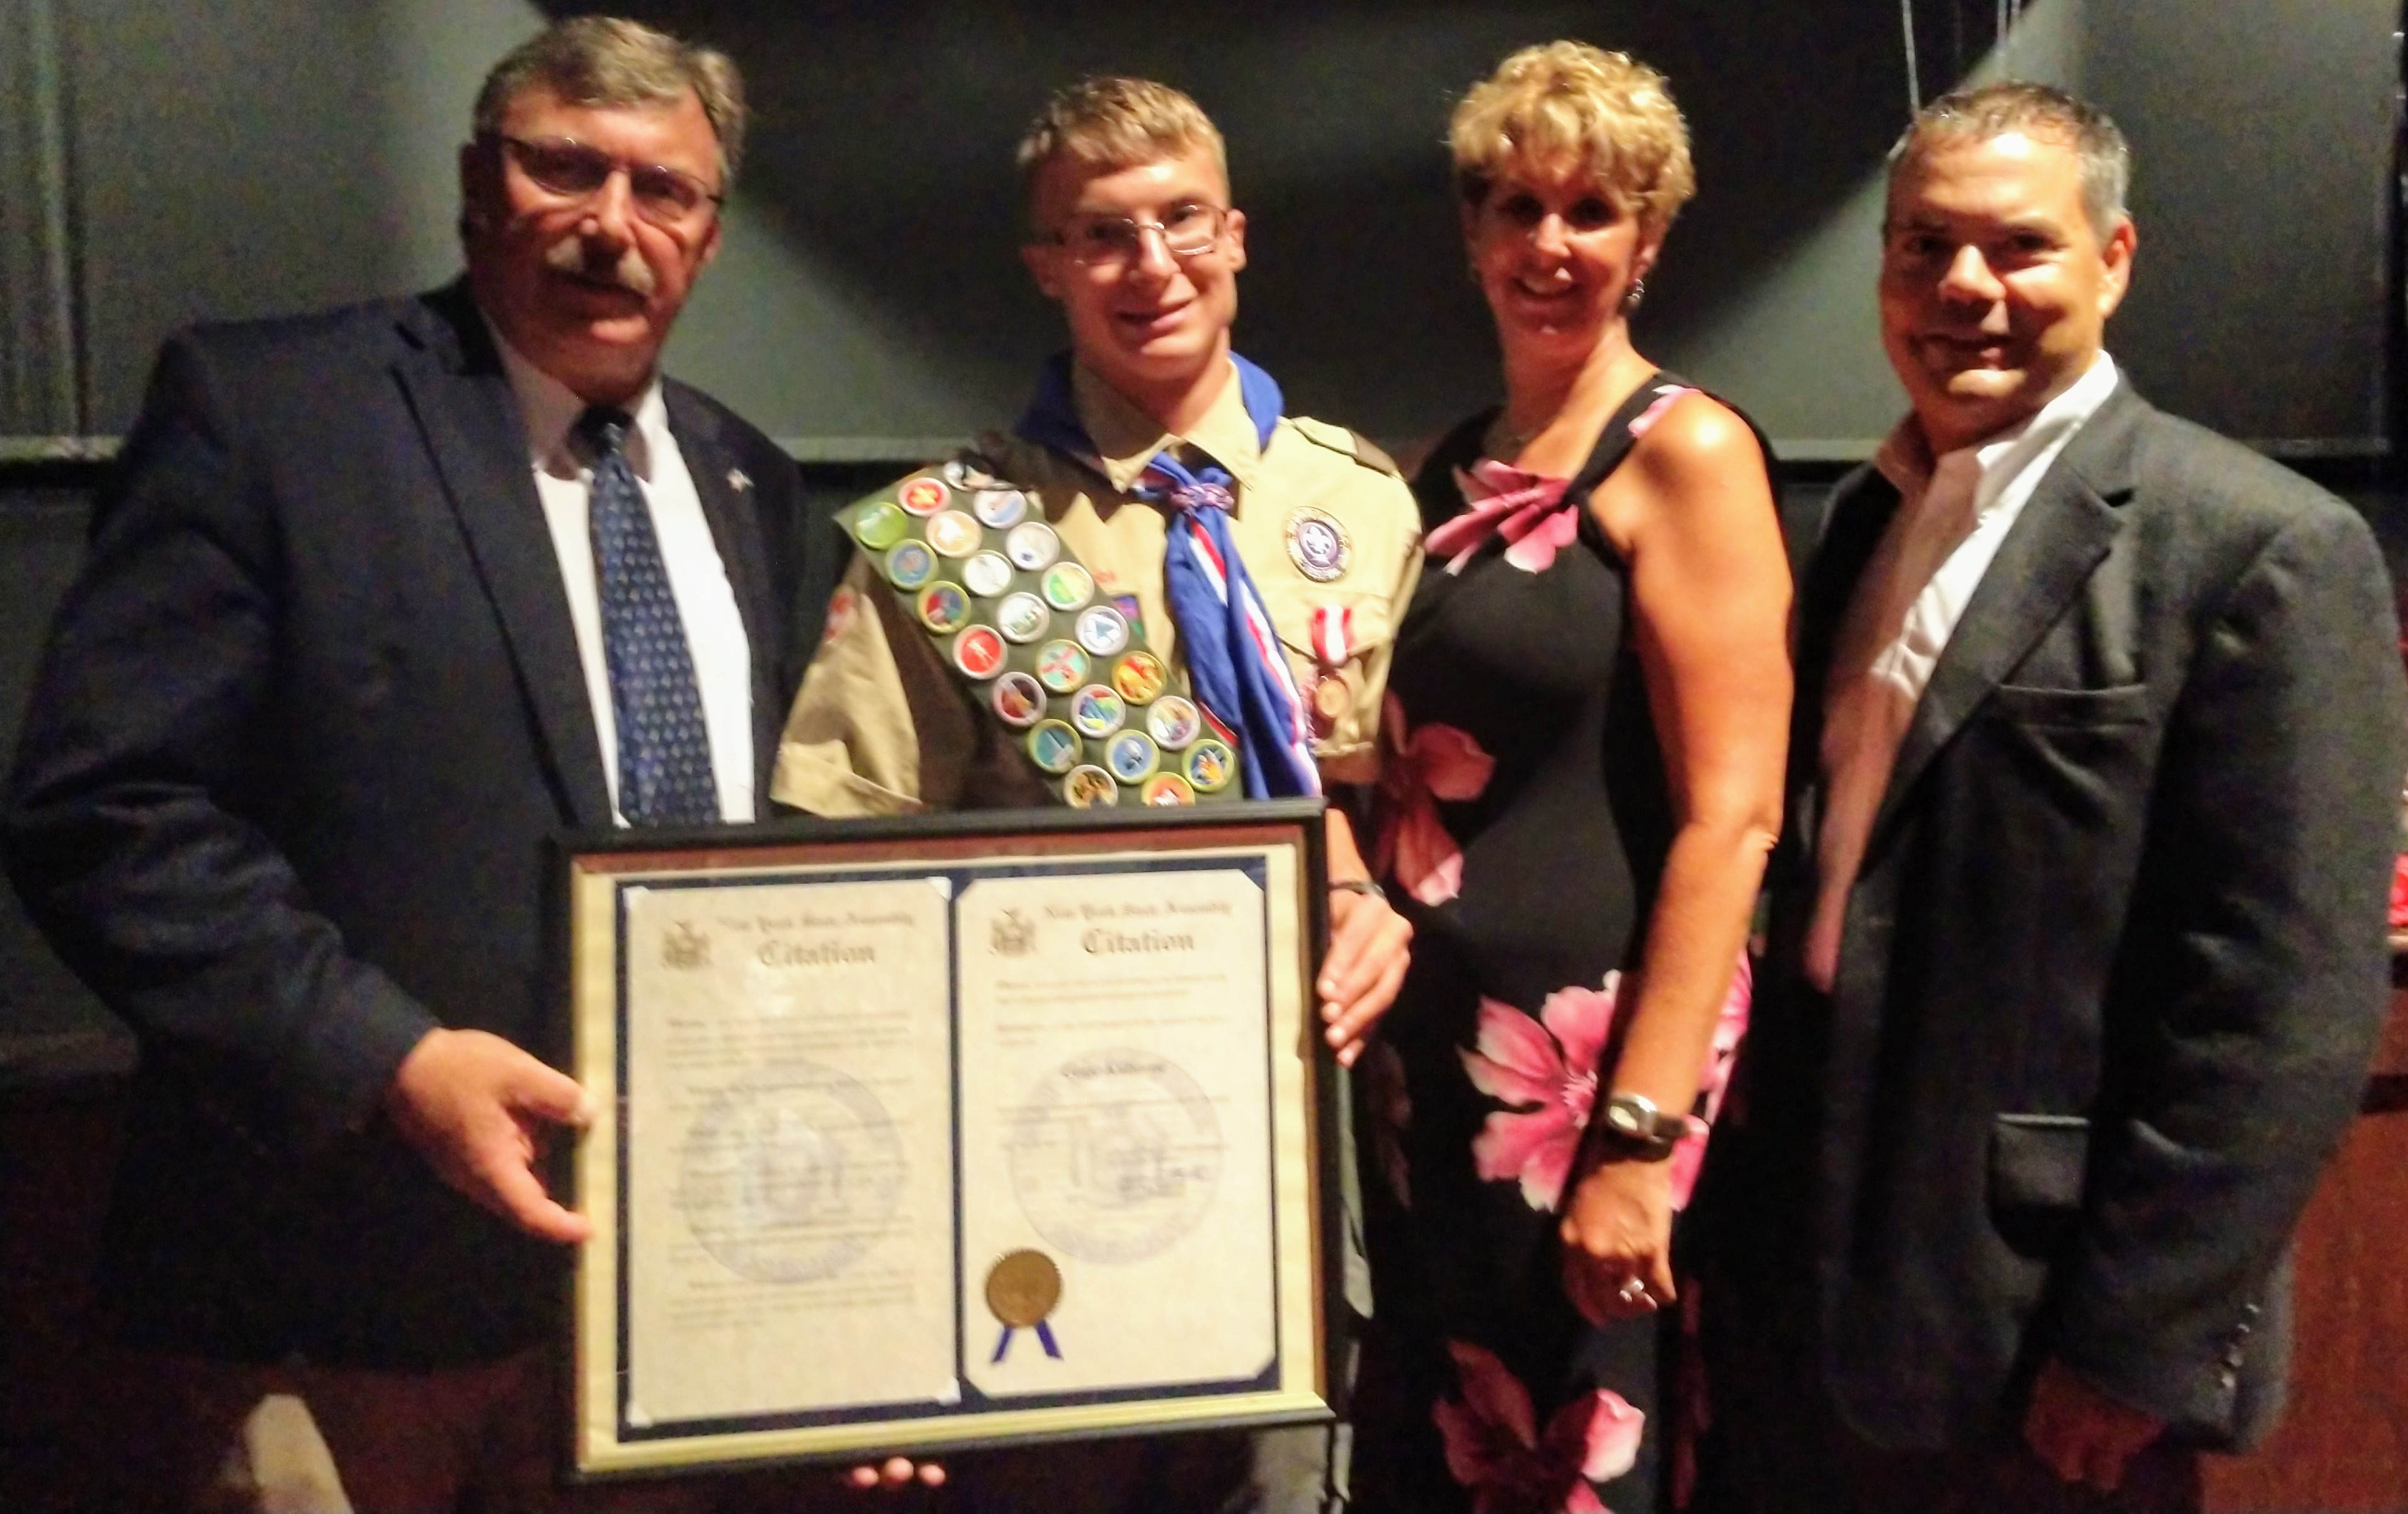 Pictured above: Assemblyman Brian Miller (far left) presents a citation to Eagle Scout Gage Kilborne on July 30, 2019 in New Hartford. Also pictured are his parents, Tammy and Carl Kilborne.